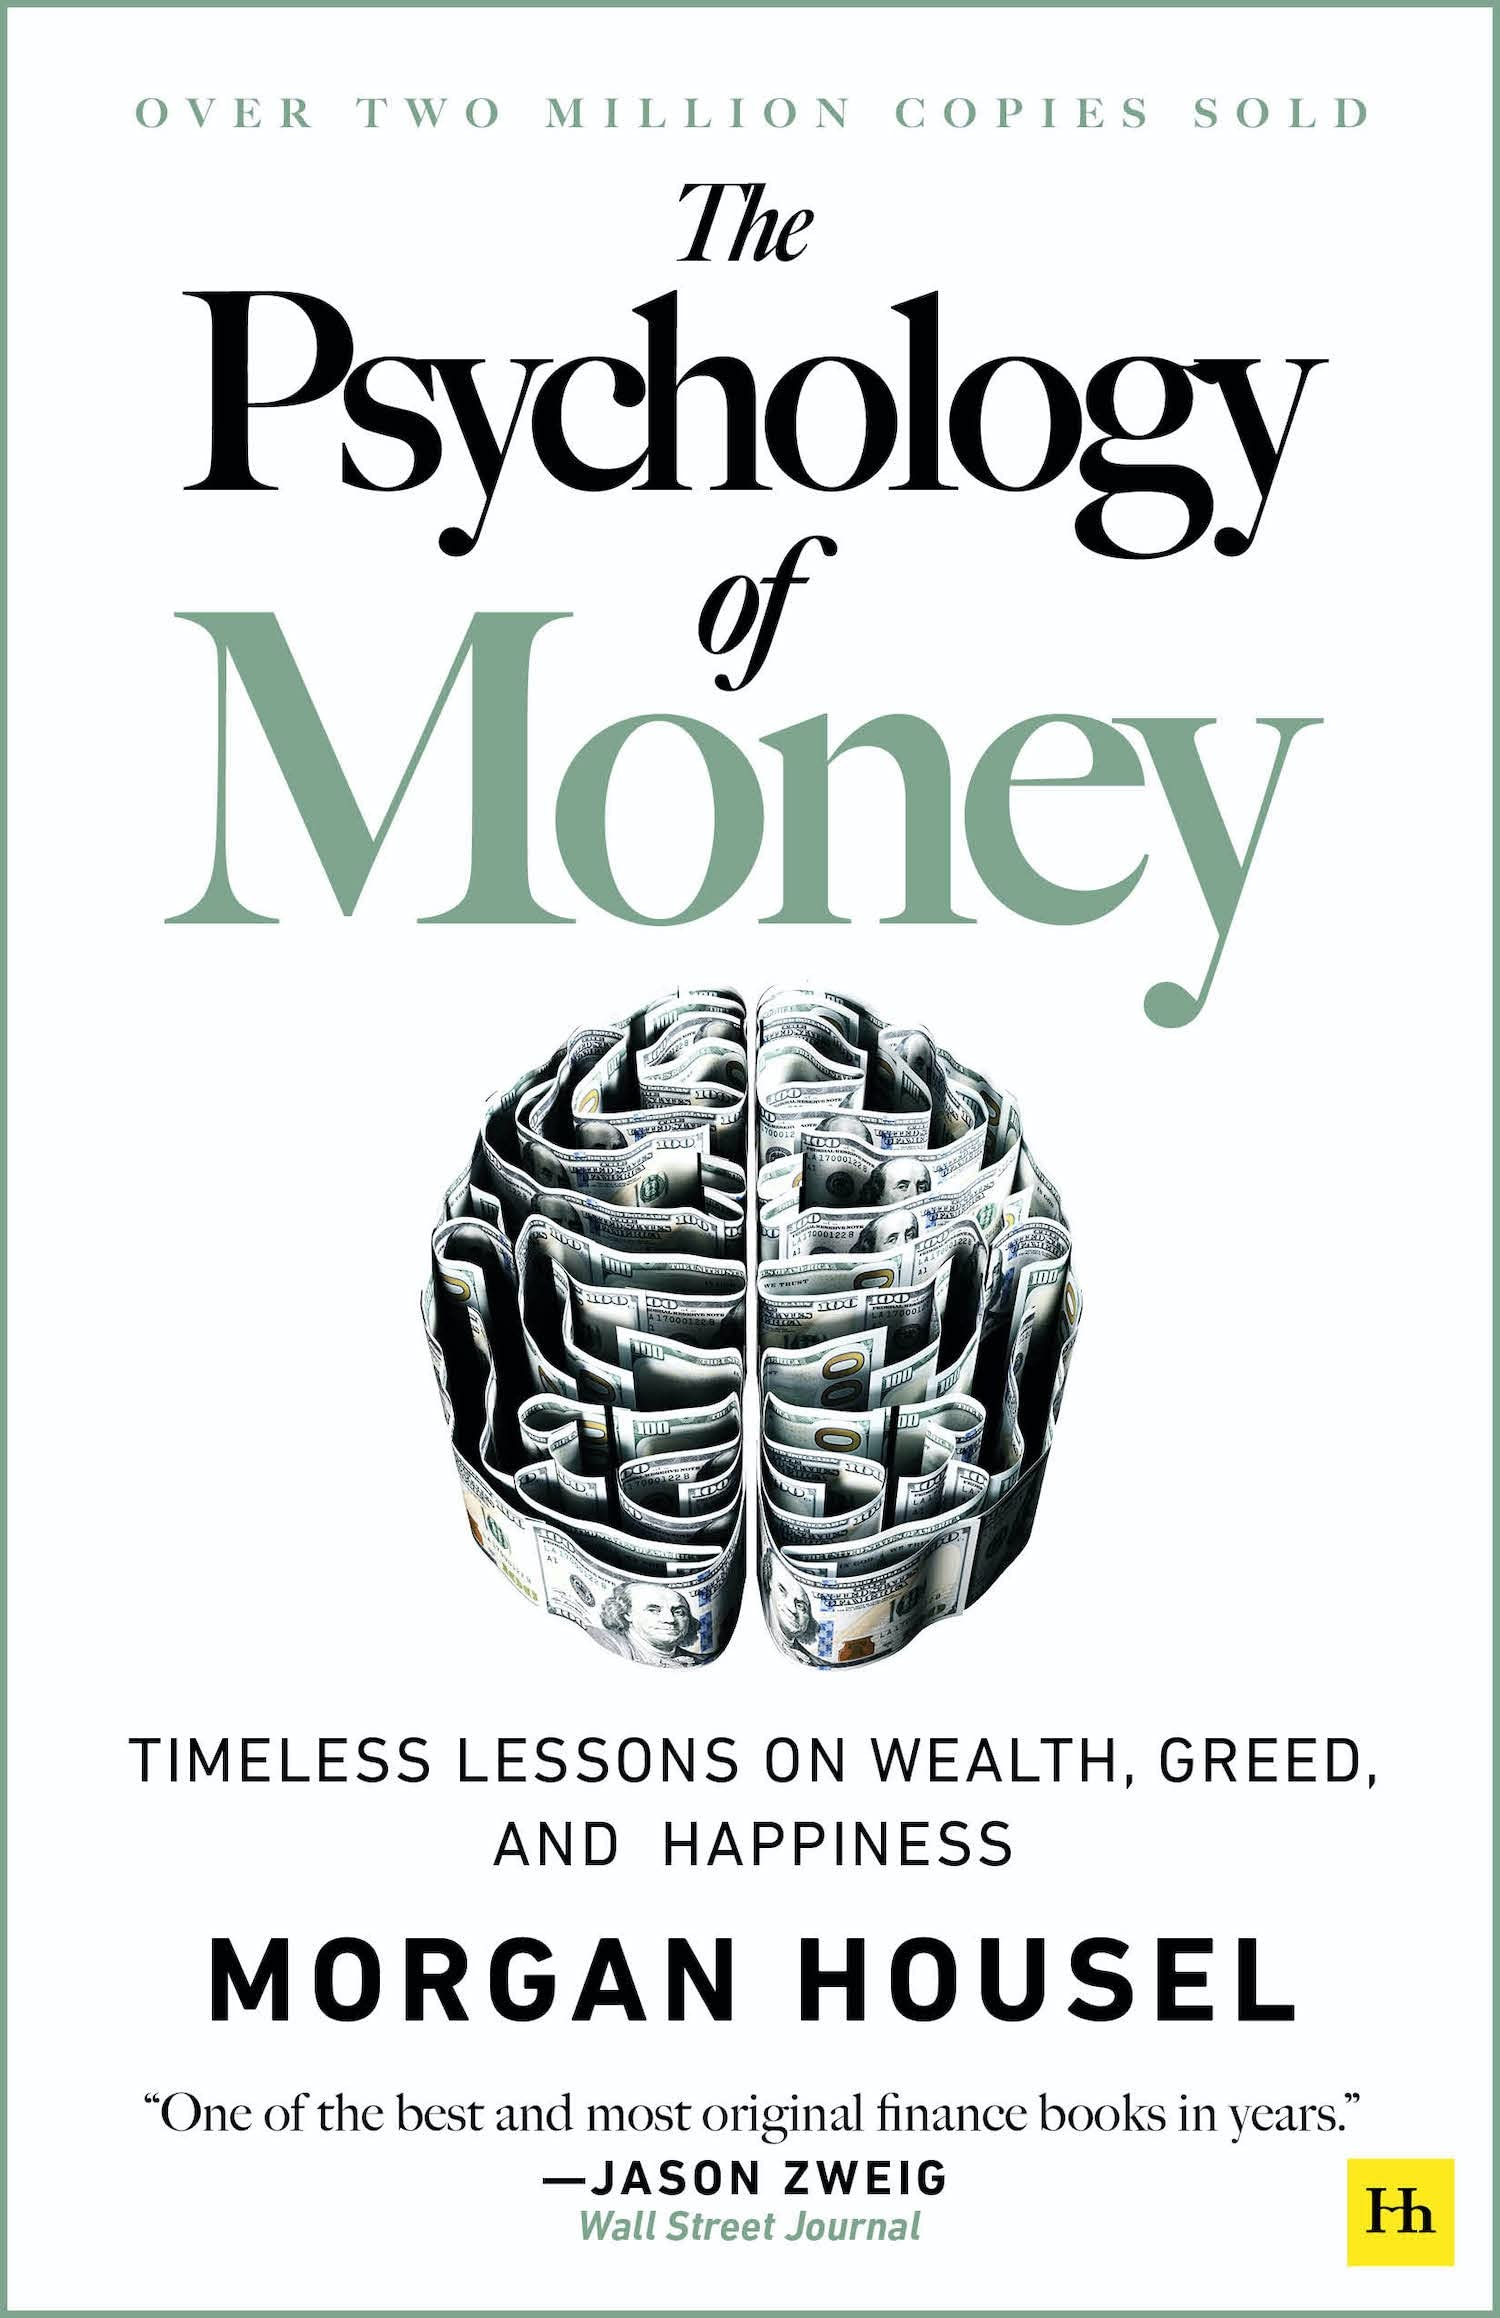 The Psychology of Money: Timeless Lessons on Wealth, Greed, and Happiness – Morgan Housel